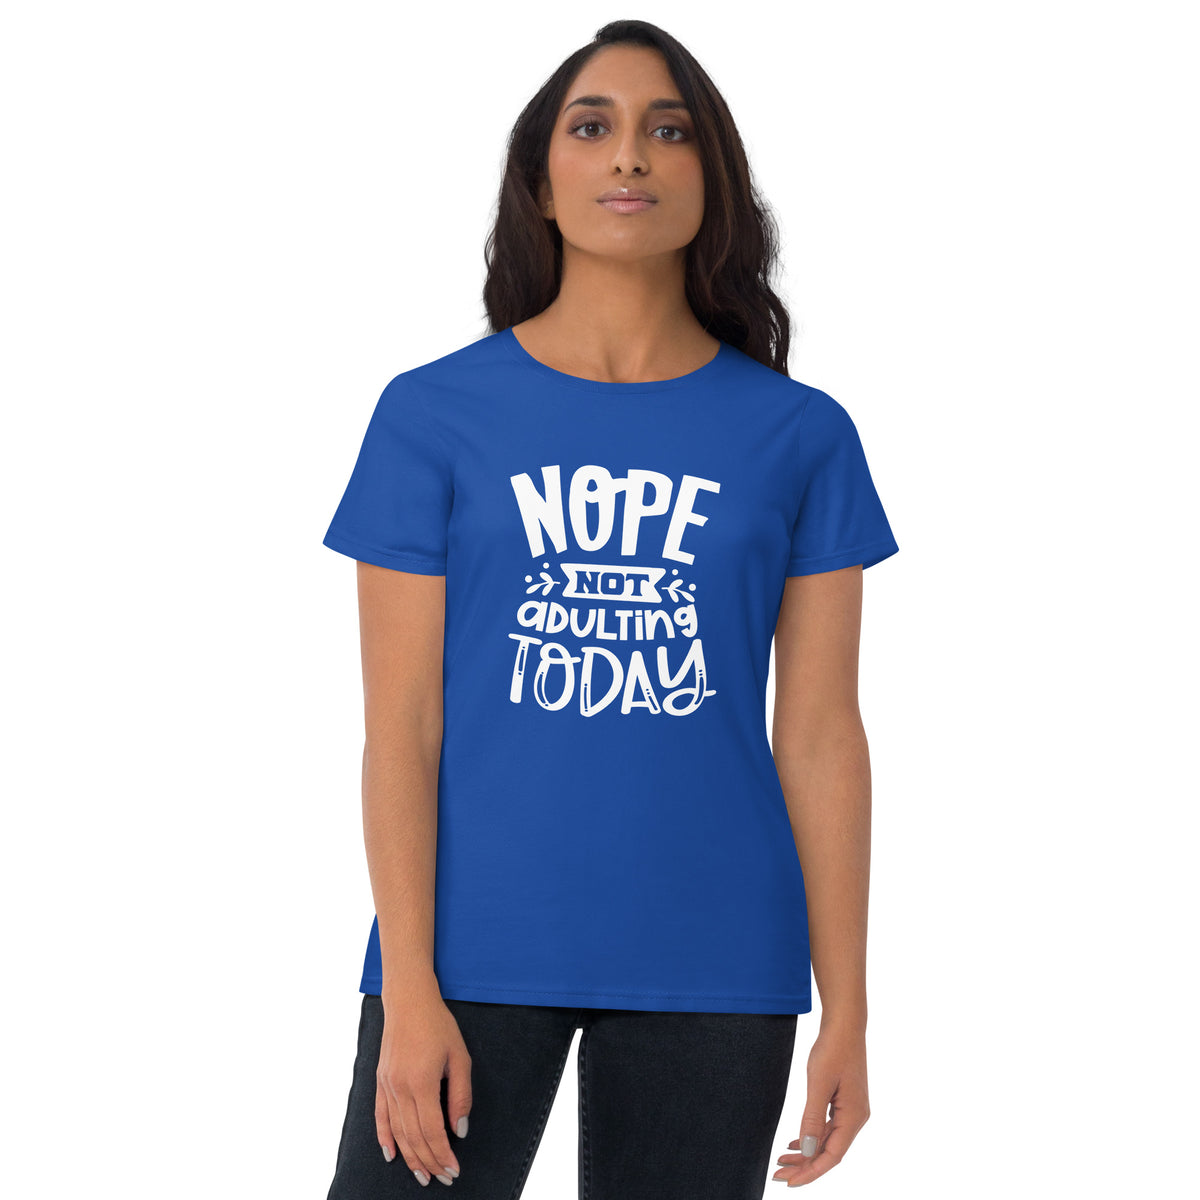 Nope Not Adulting Today Women's Short Sleeve T-Shirt